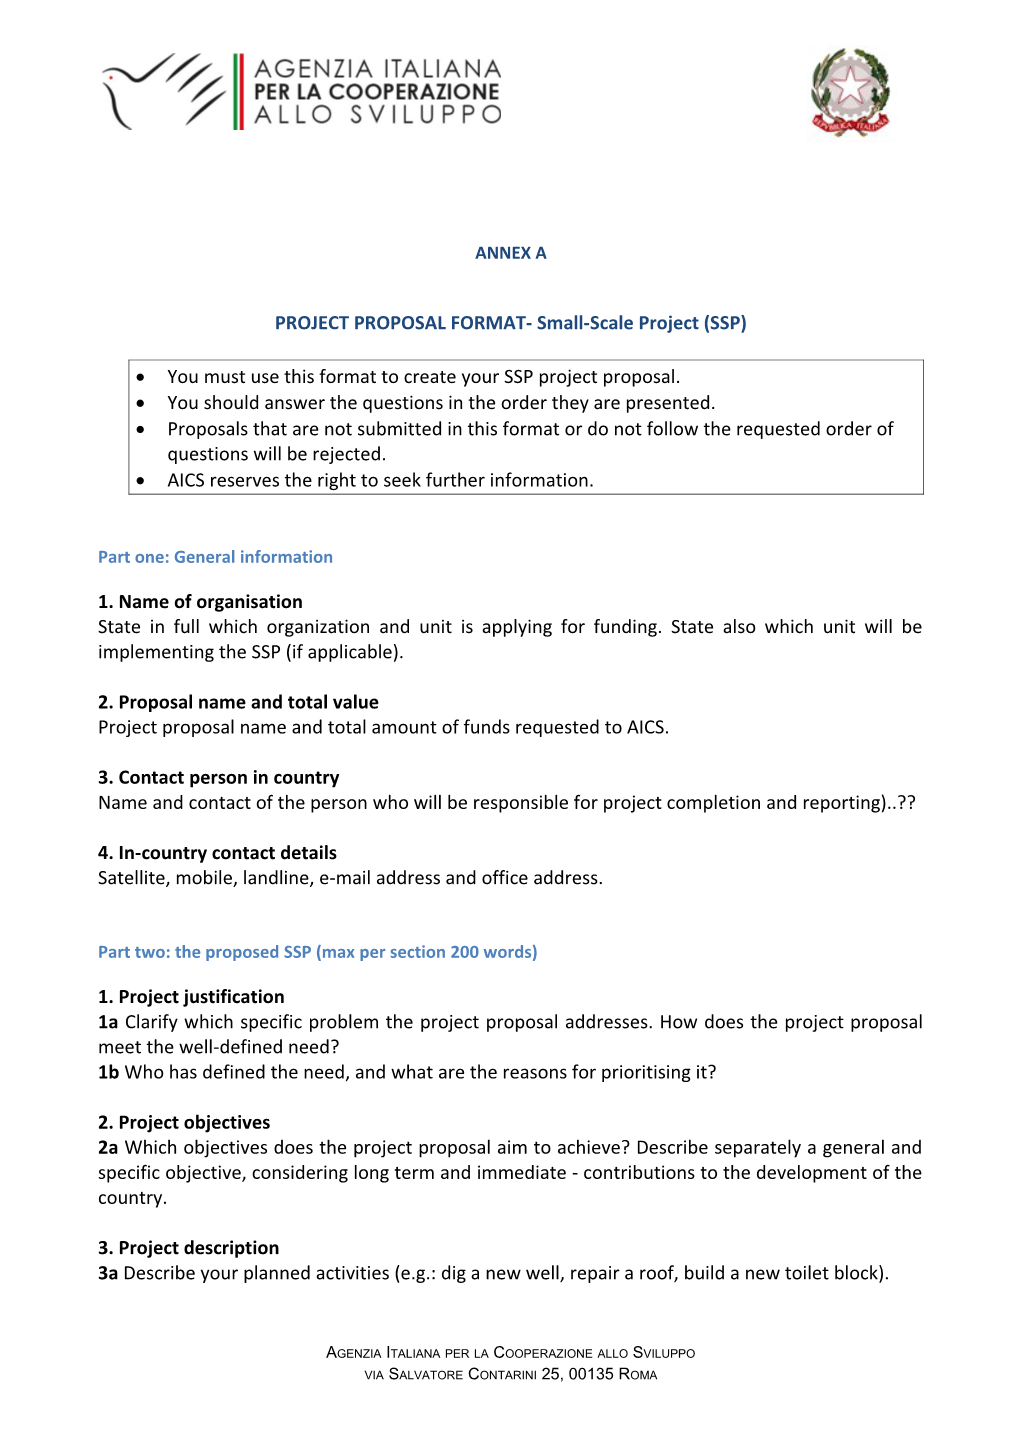 PROJECT PROPOSAL FORMAT- Small-Scale Project (SSP)